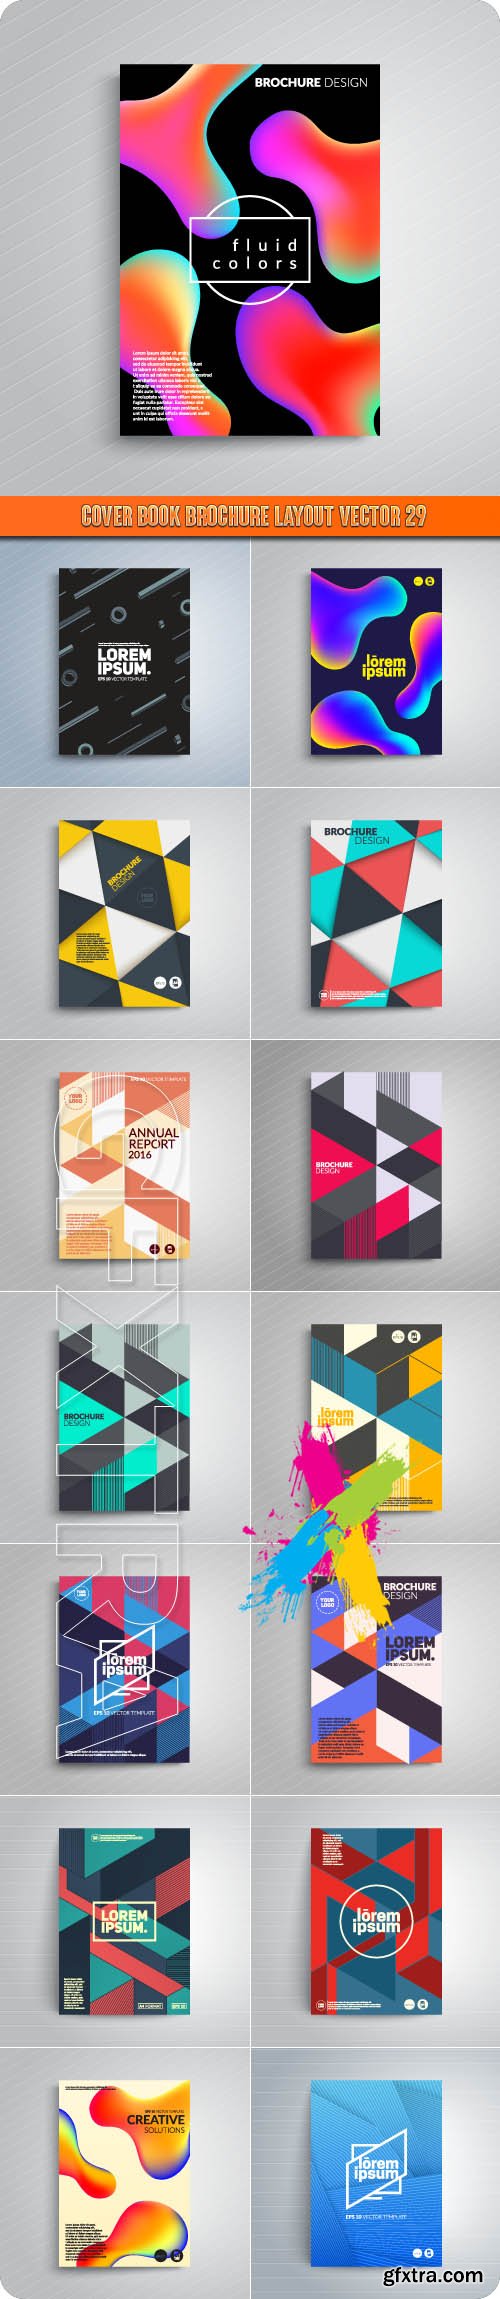 Cover book brochure layout vector 29